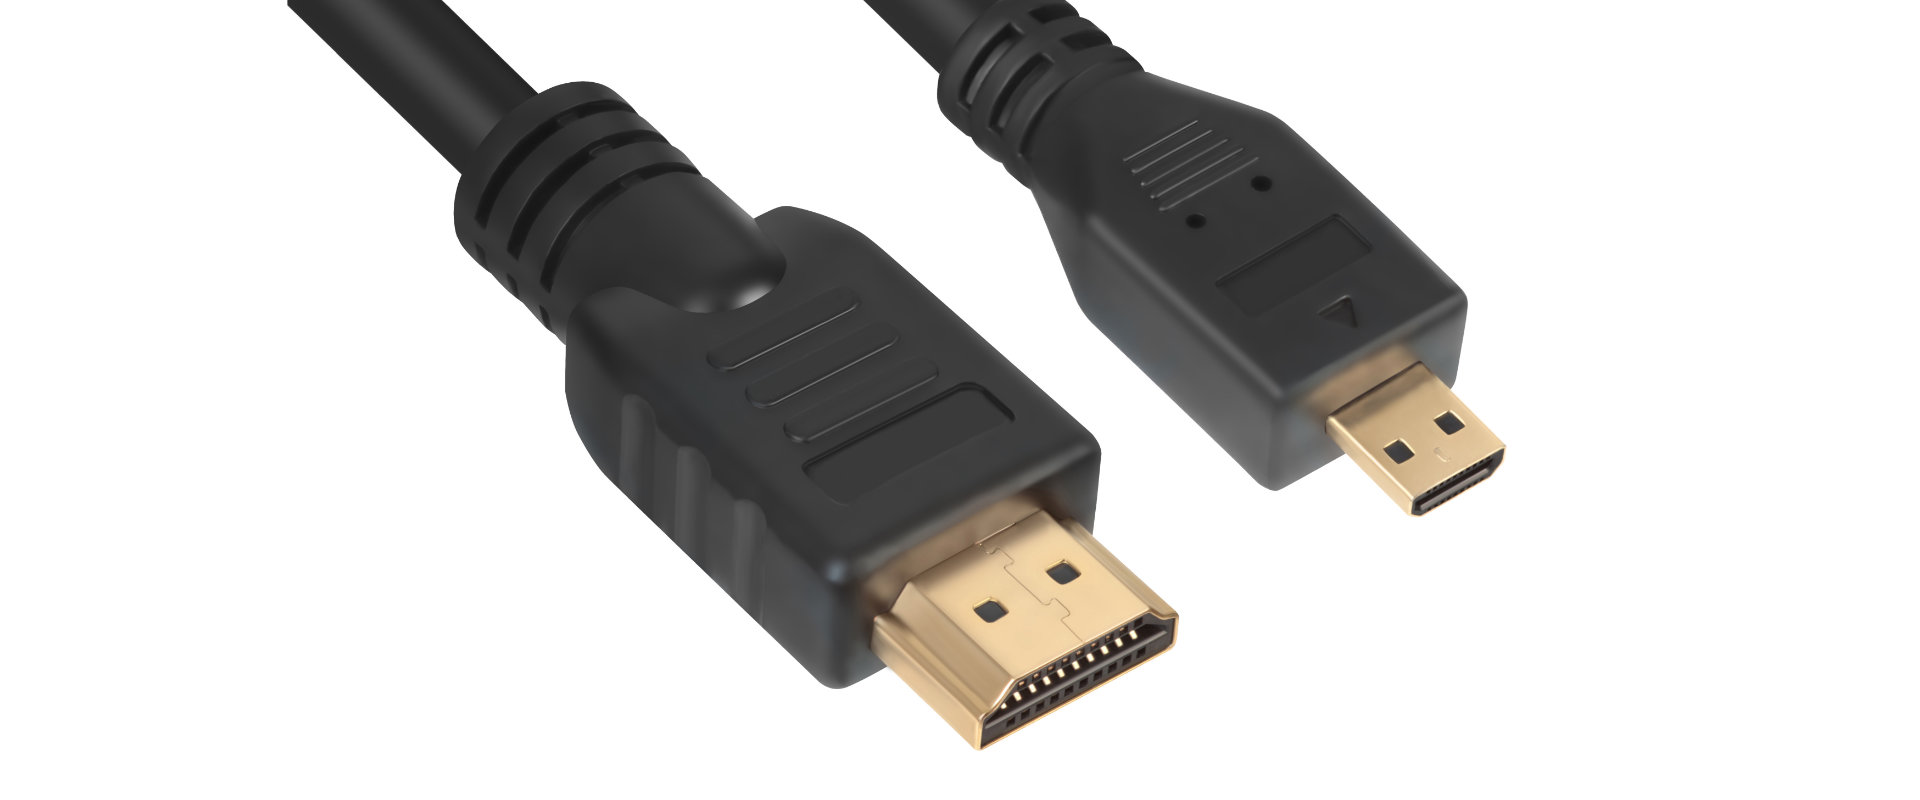 https://www.boxcast.com/hs-fs/hubfs/Blog%20Images/B202%20-%20Cables%20and%20Converters/BlogImage-B202_CablesConverters_MicroHDMI.jpg?width=590&height=246&name=BlogImage-B202_CablesConverters_MicroHDMI.jpg